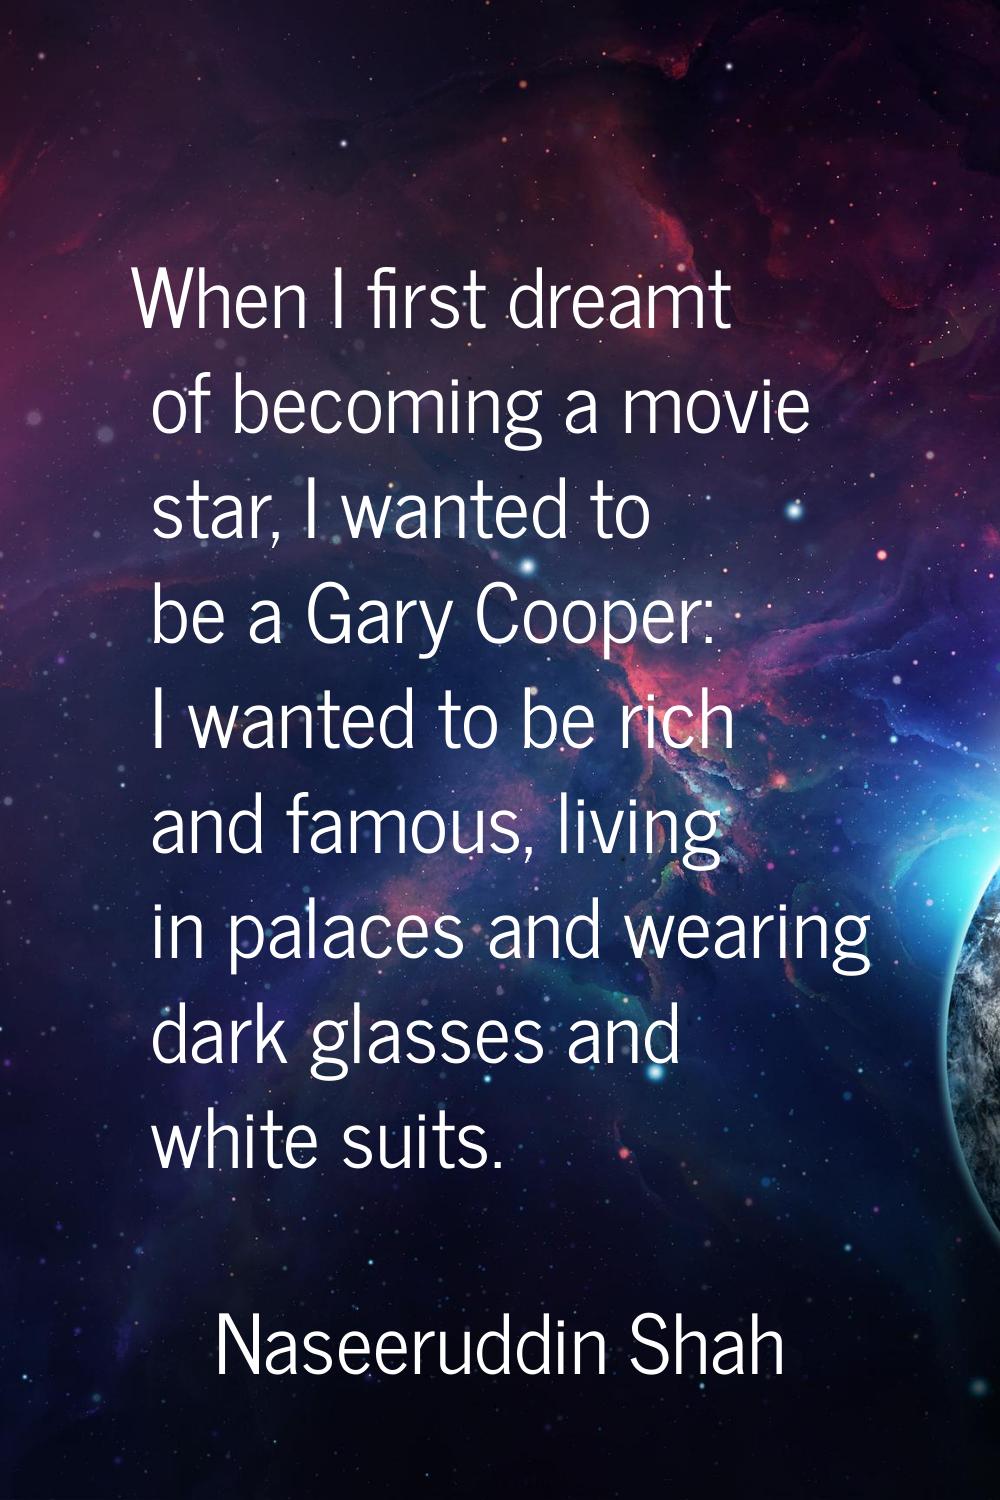 When I first dreamt of becoming a movie star, I wanted to be a Gary Cooper: I wanted to be rich and